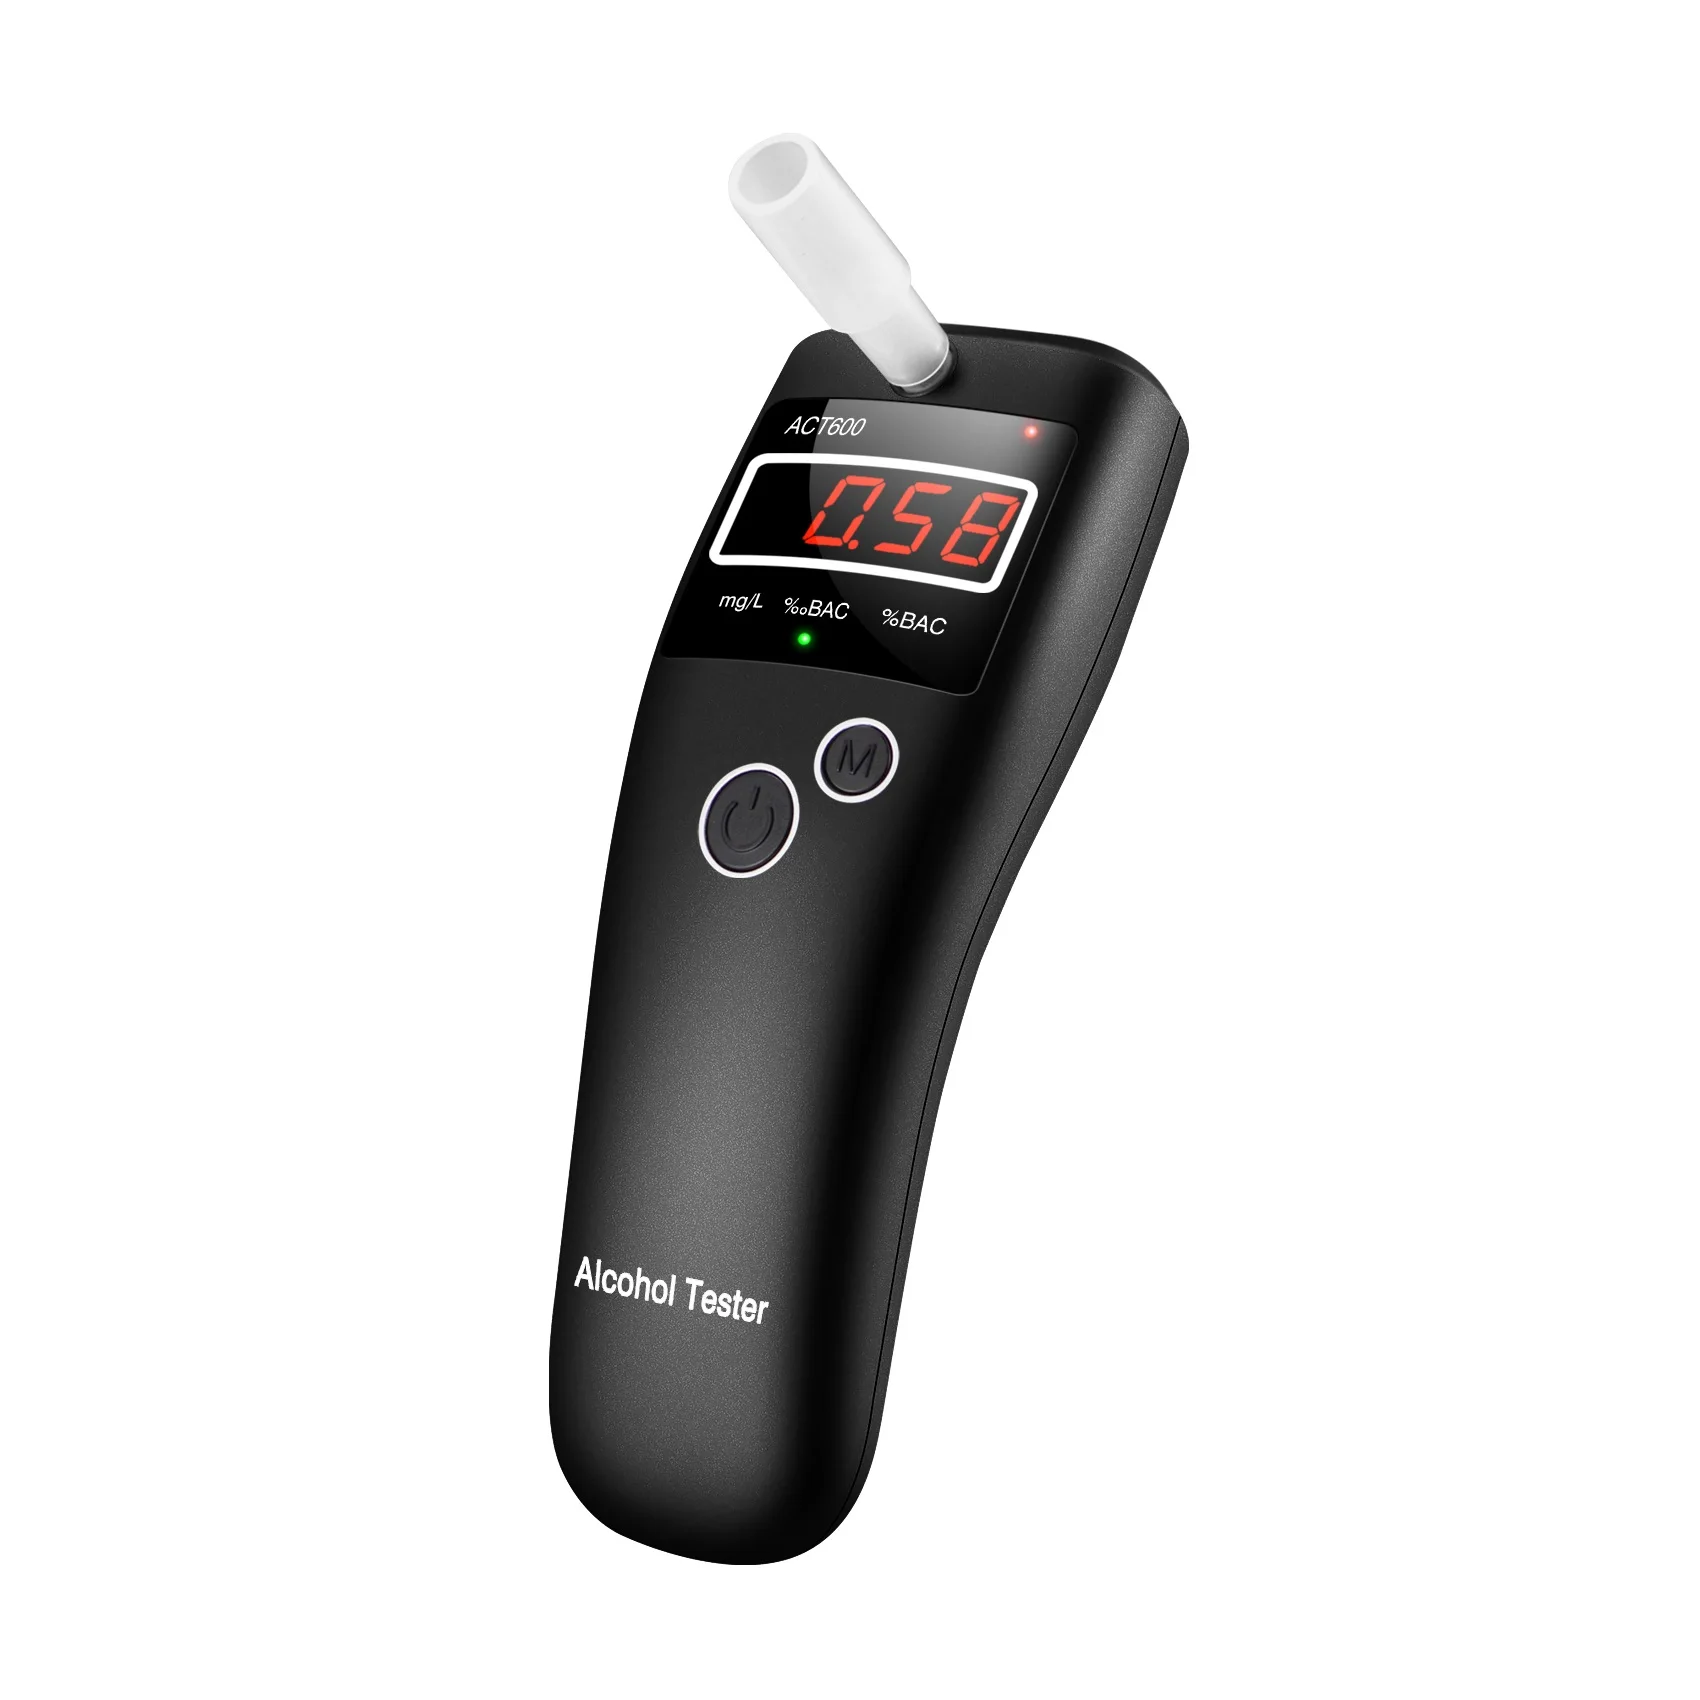 Portable breathing and measuring drunk alcohol tester breathalyzer